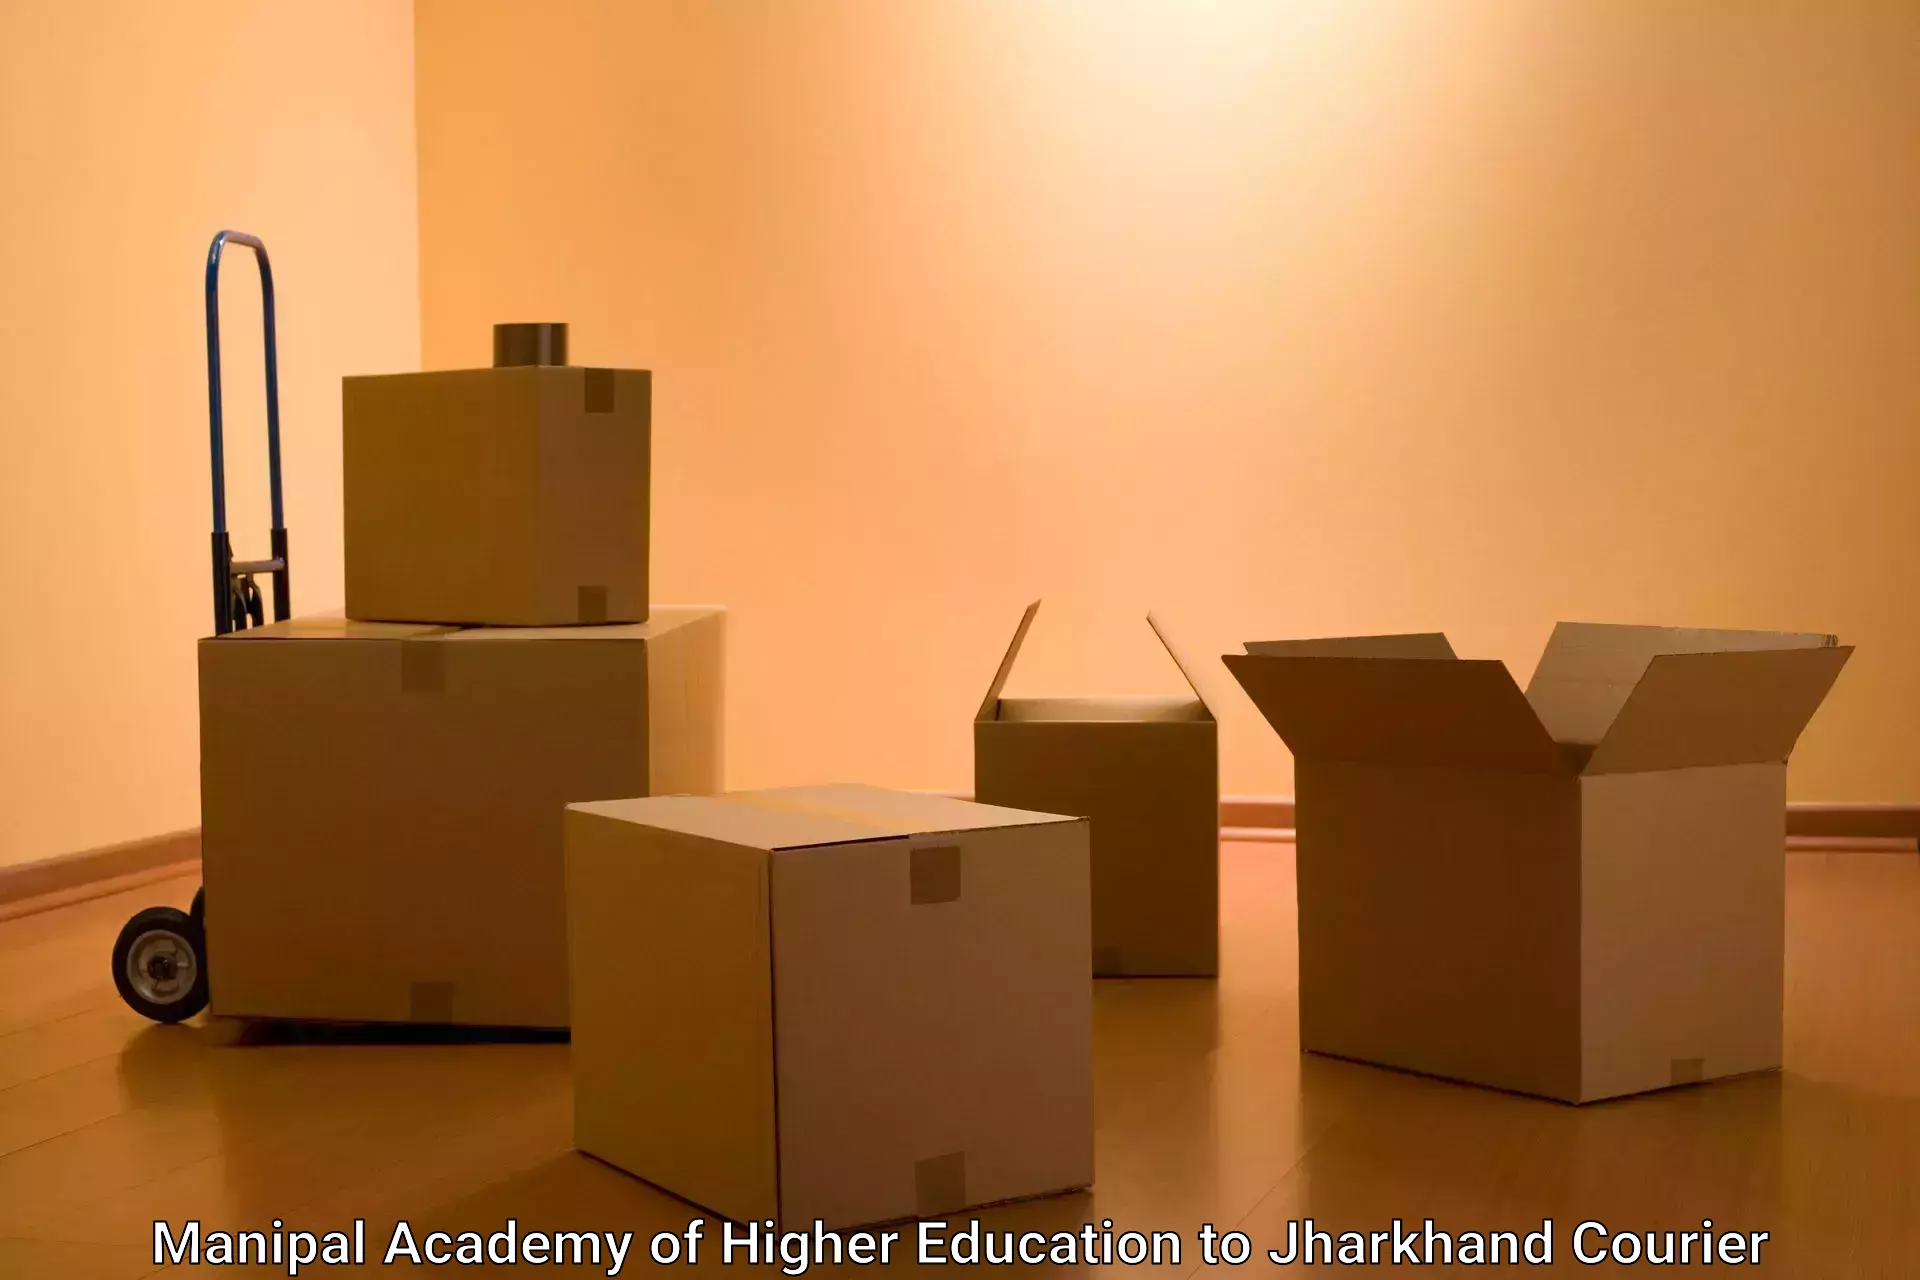 Professional courier handling Manipal Academy of Higher Education to Jharkhand